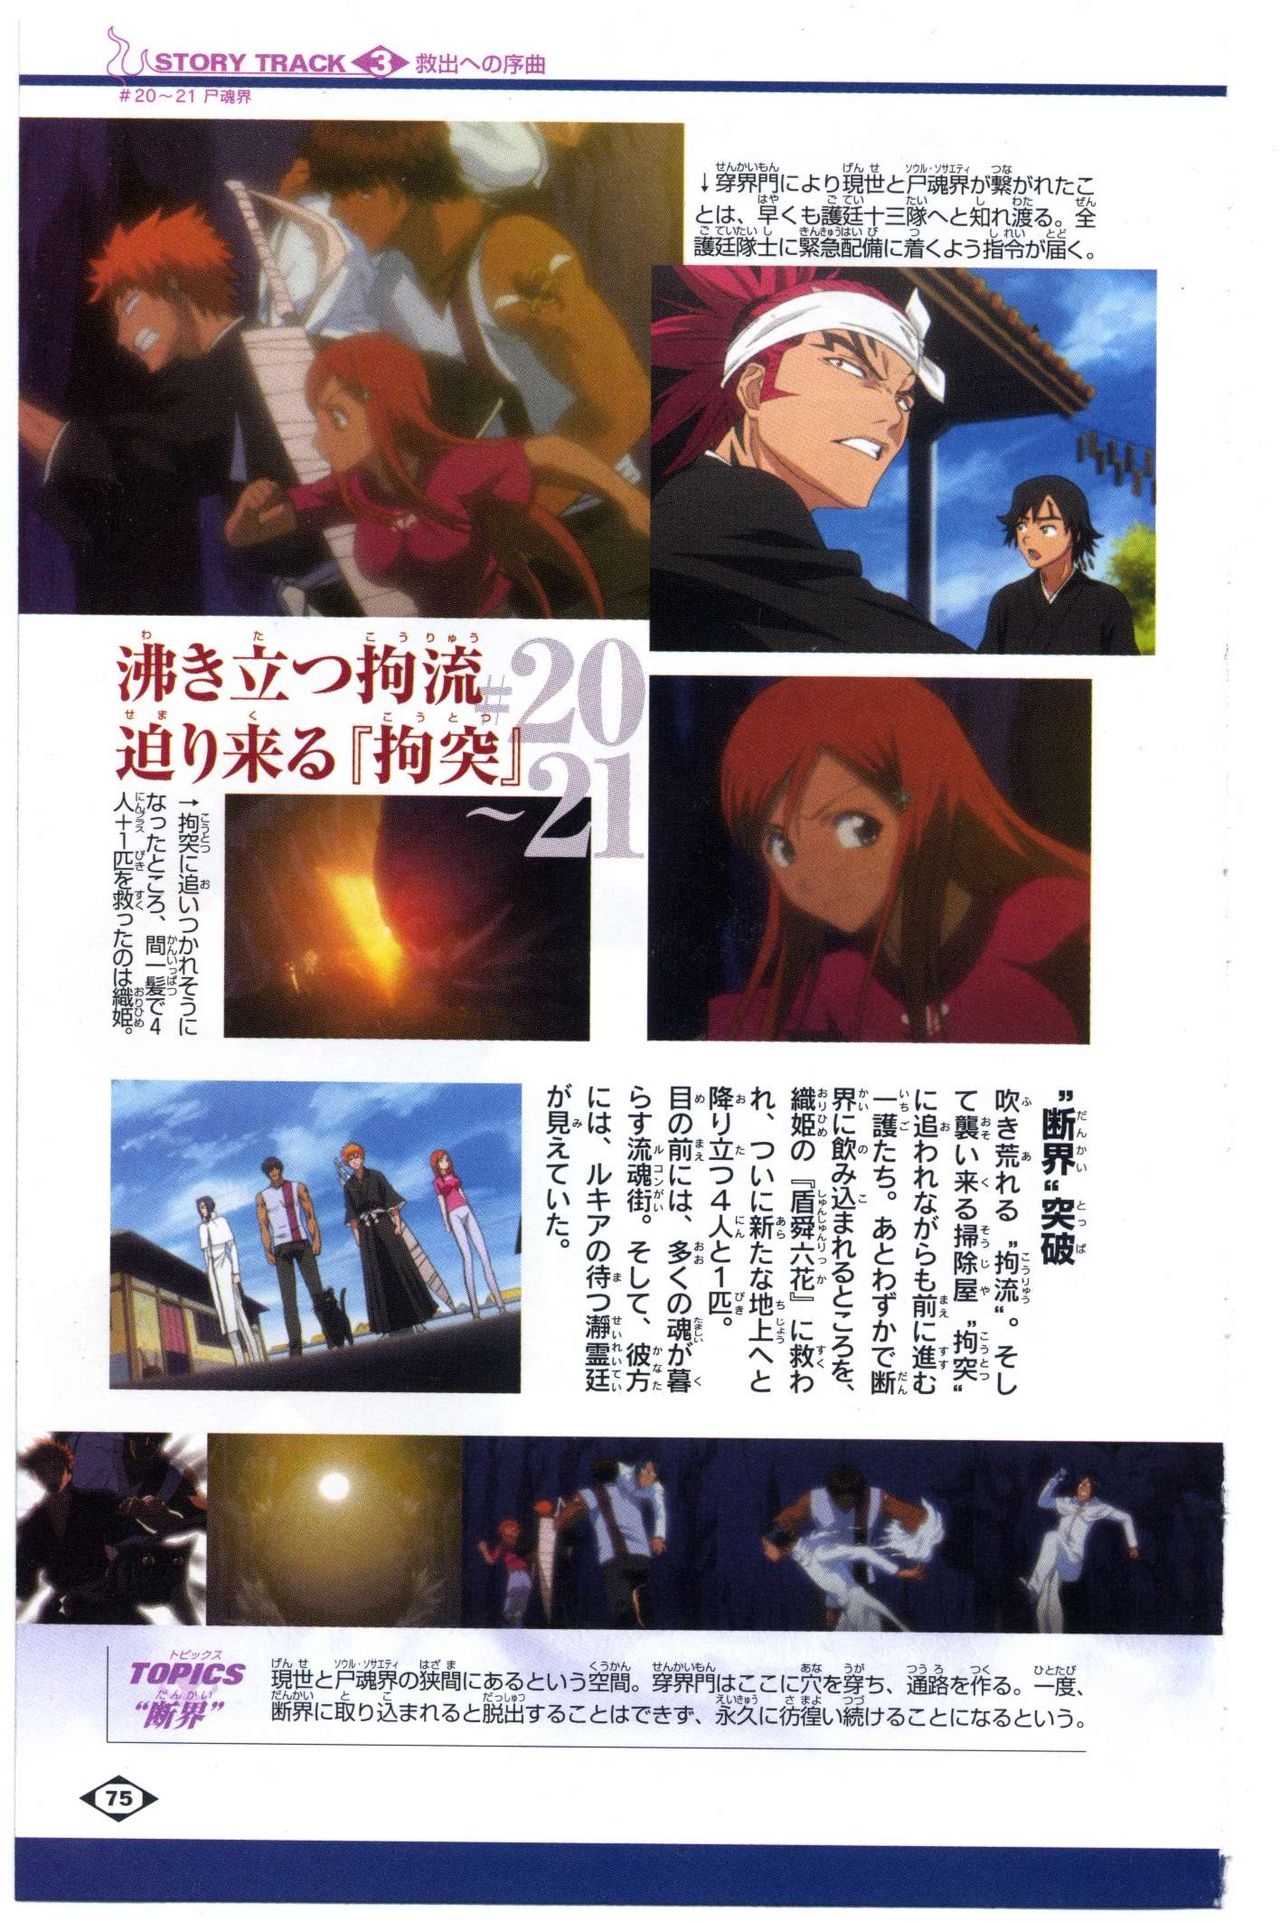 Bleach: Official Animation Book VIBEs 75